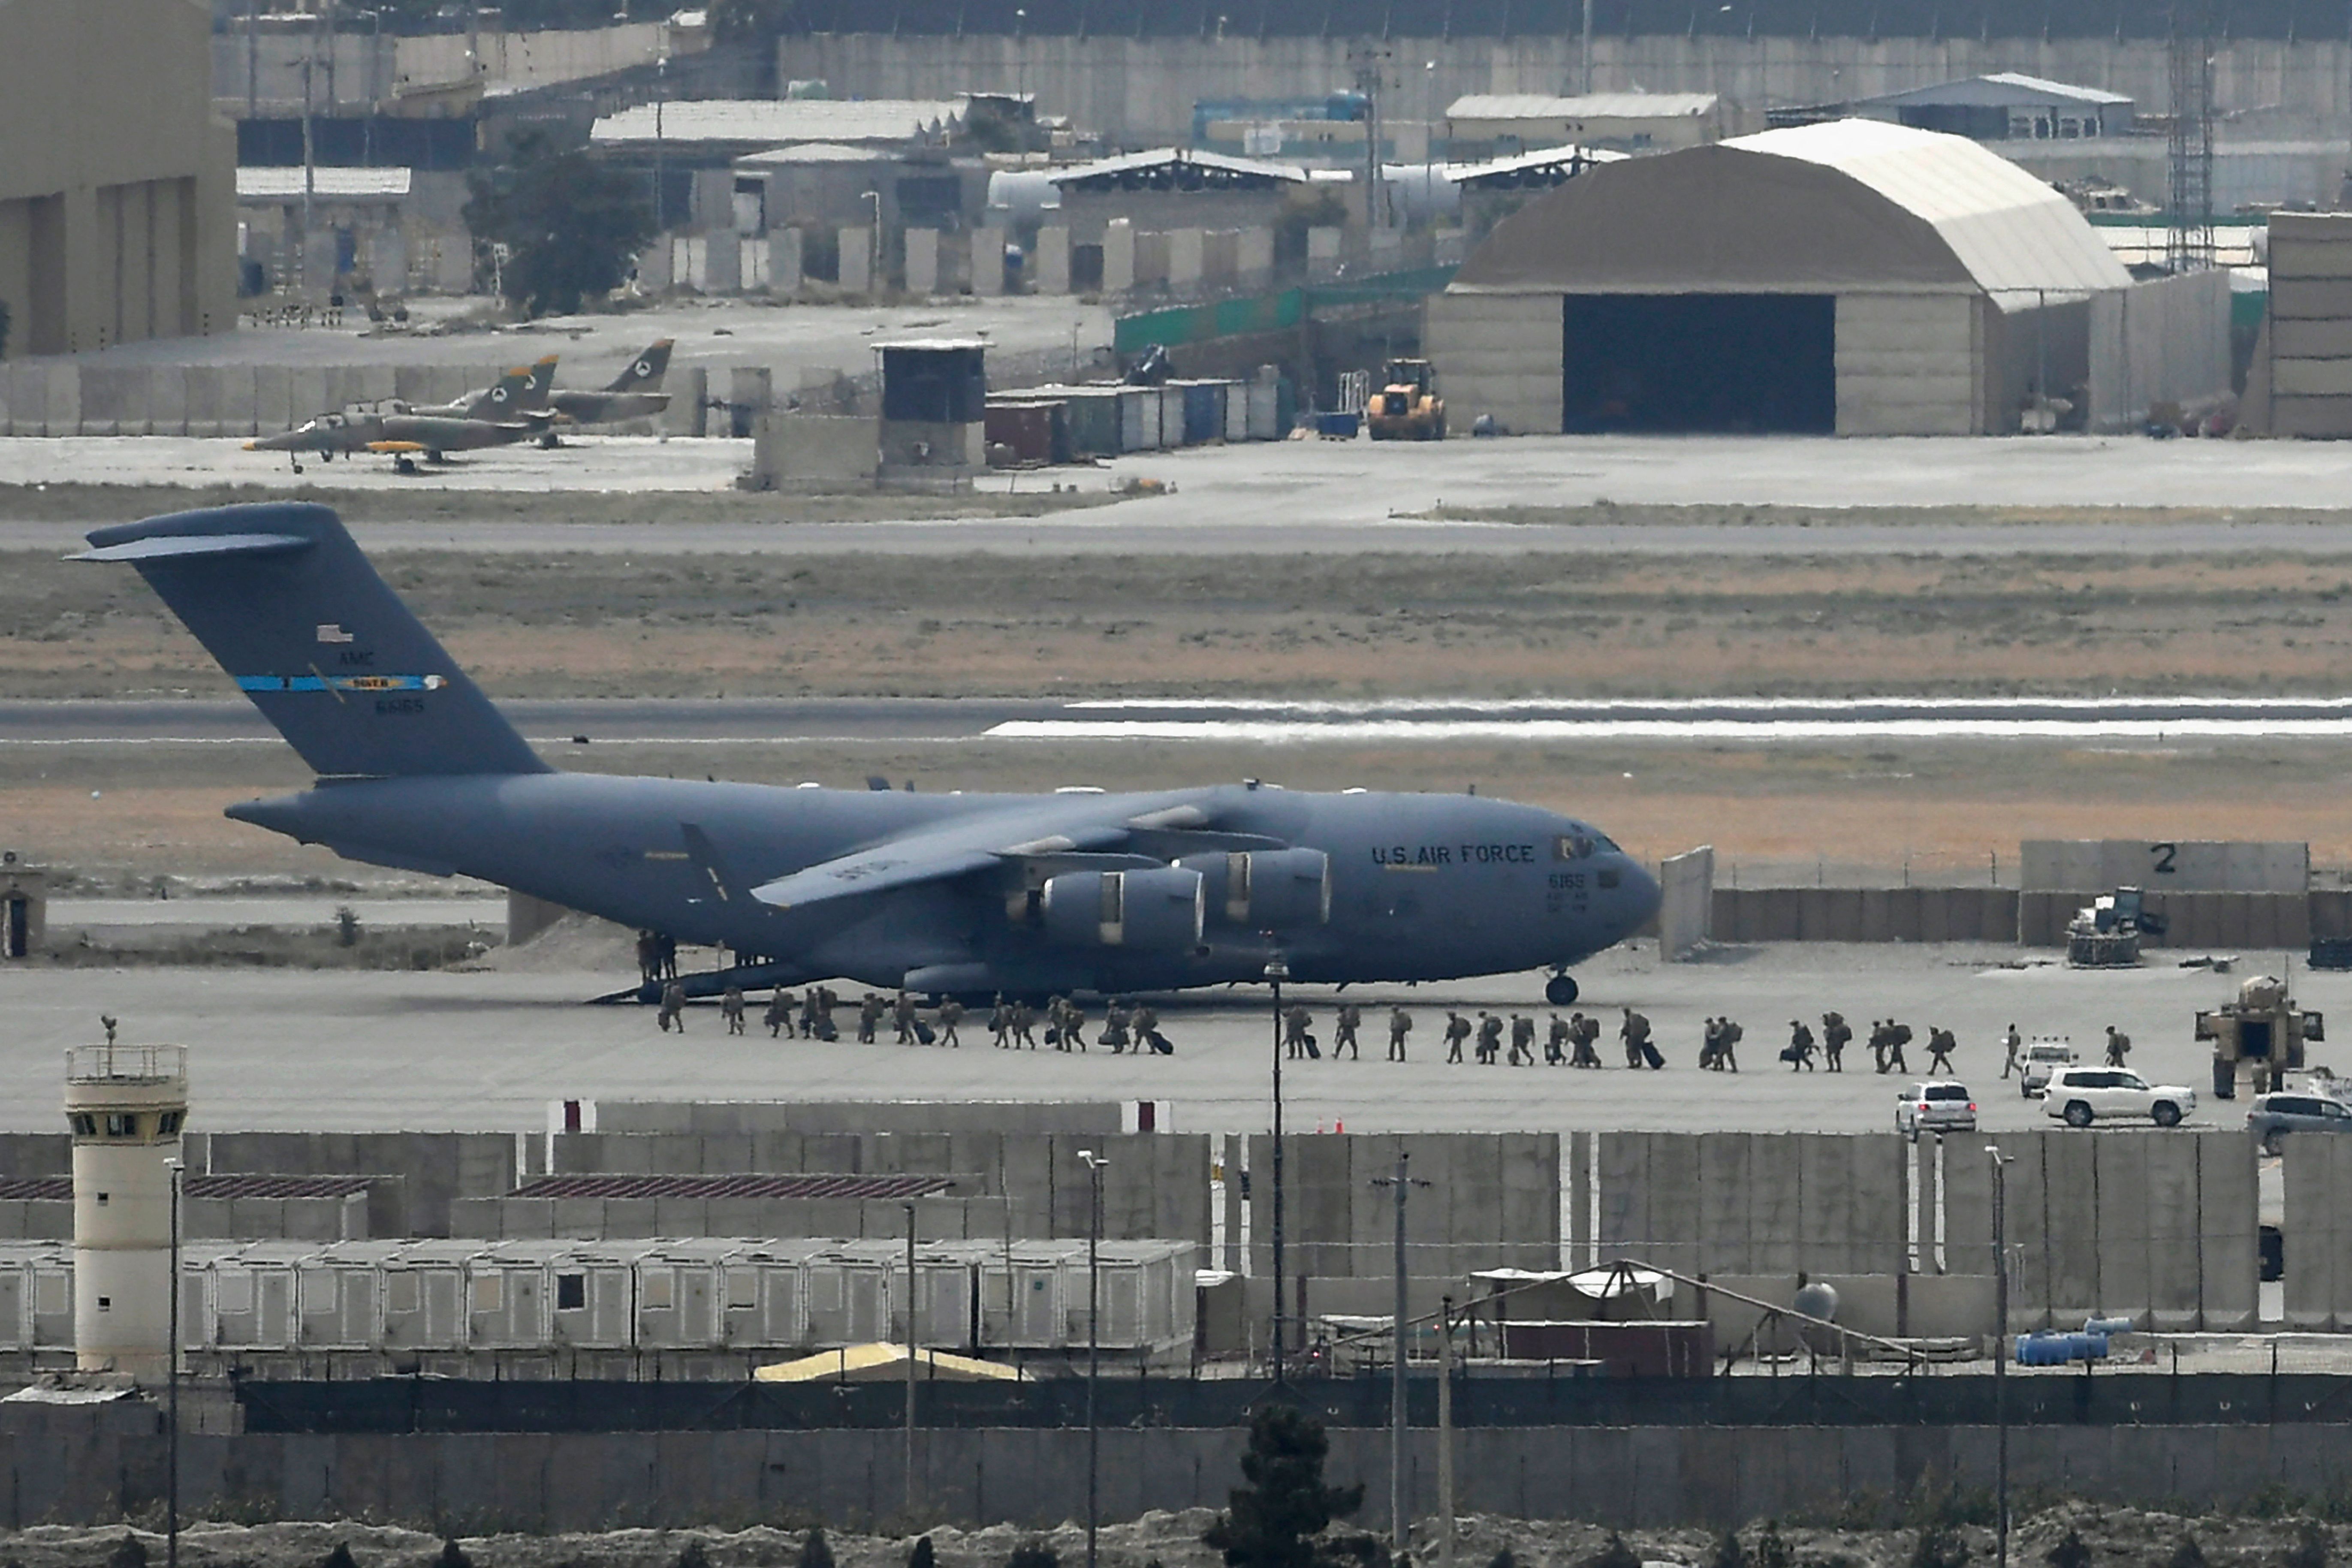  US soldiers board an US Air Force aircraft at the airport in Kabul on August 30